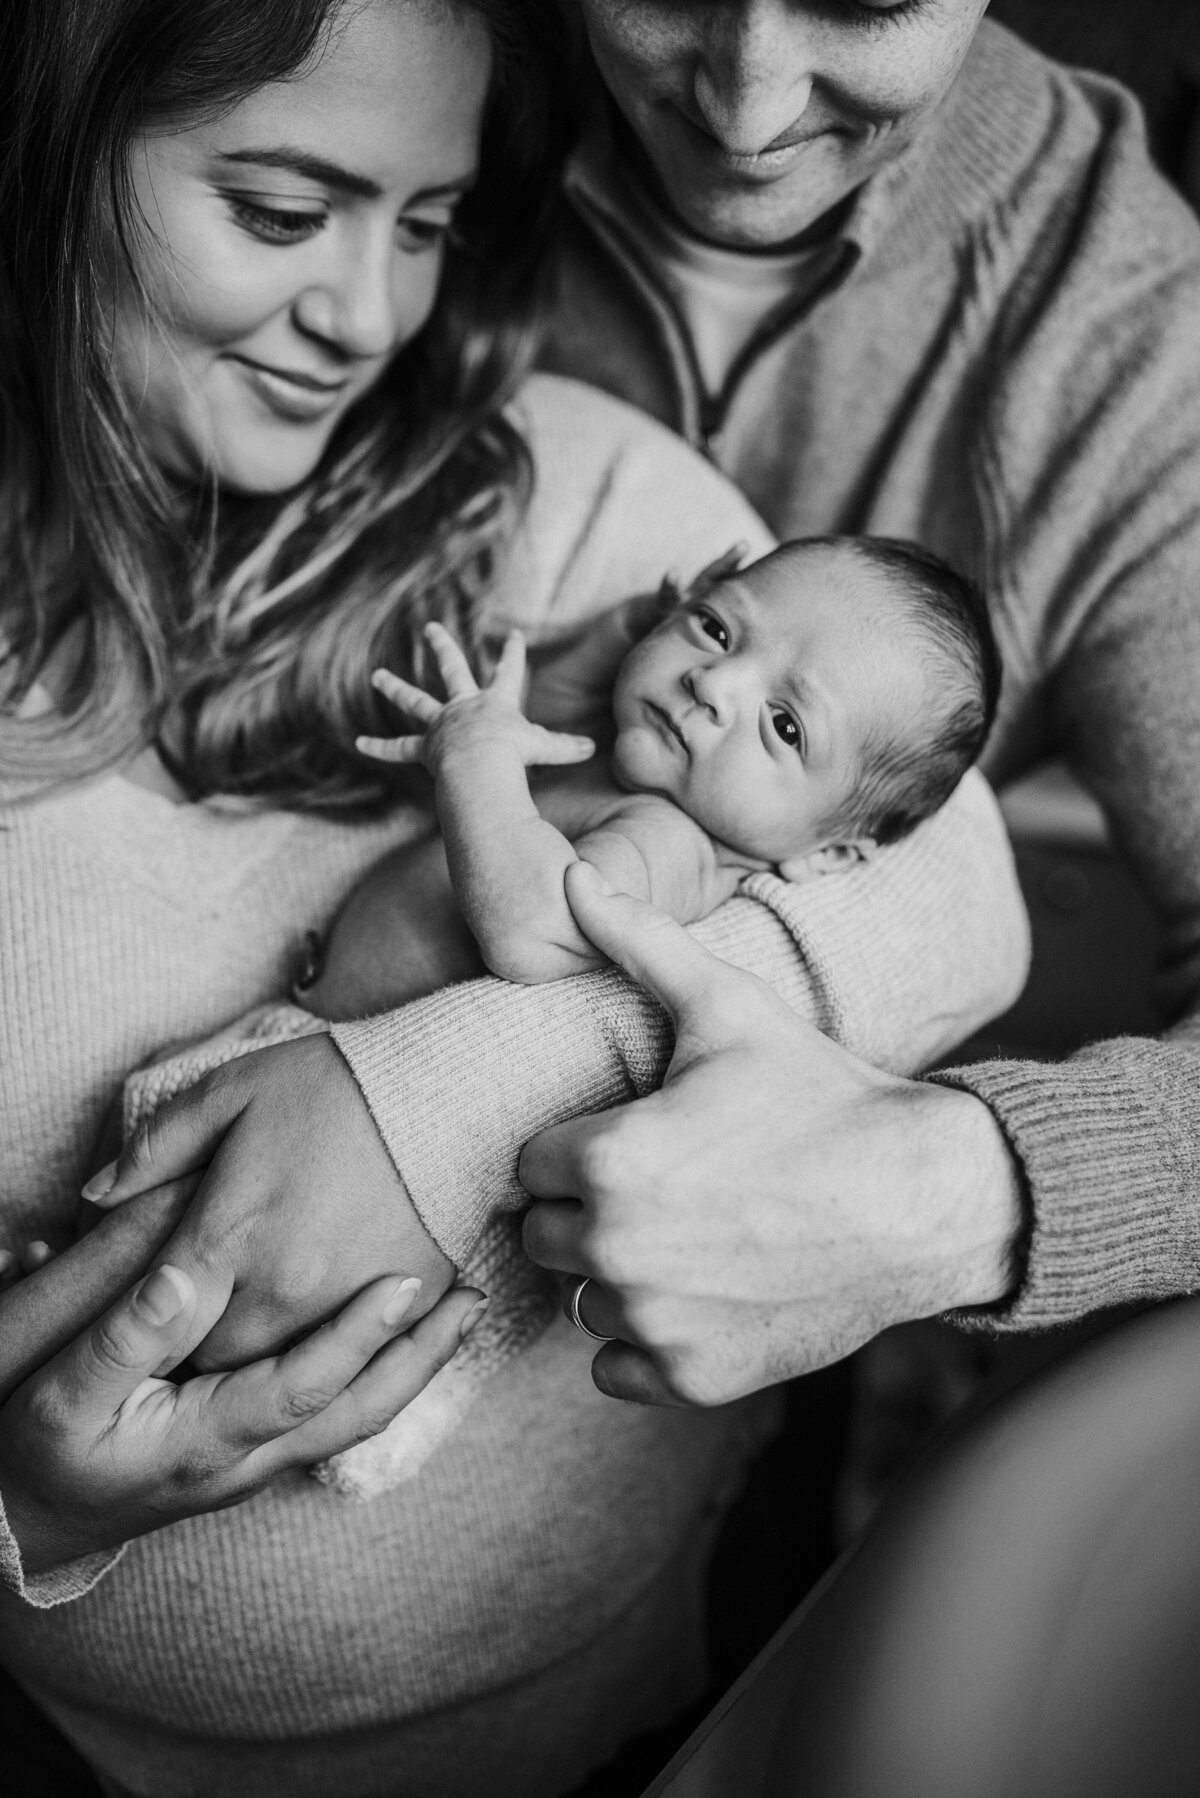 black and white image of new family holding their new baby boy in their arms as baby stares at the camera